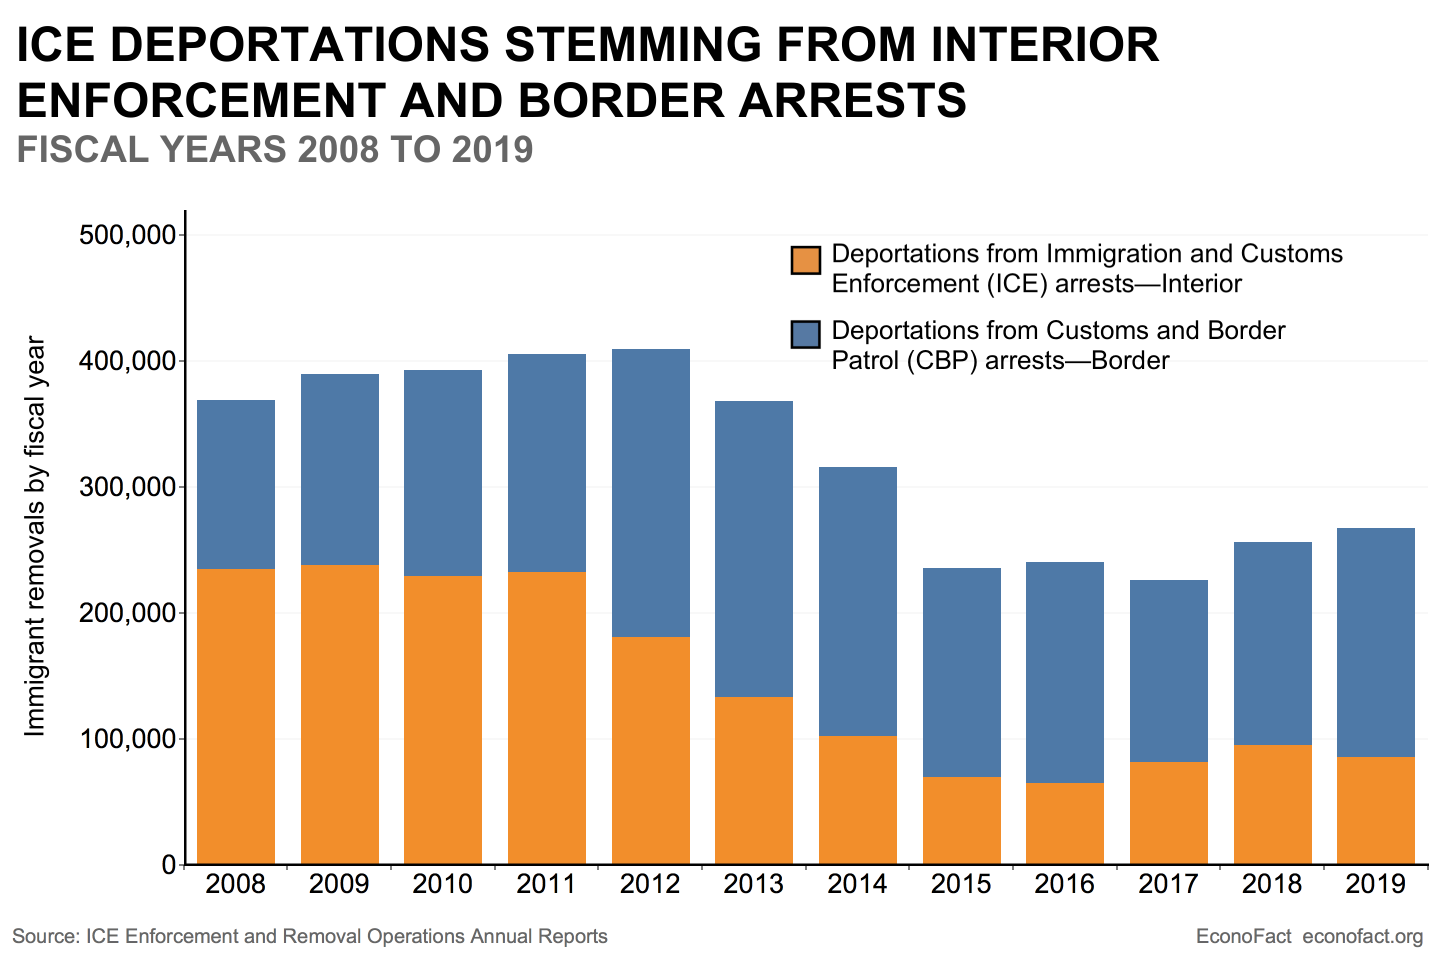 Immigrant Deportations During the Trump Administration